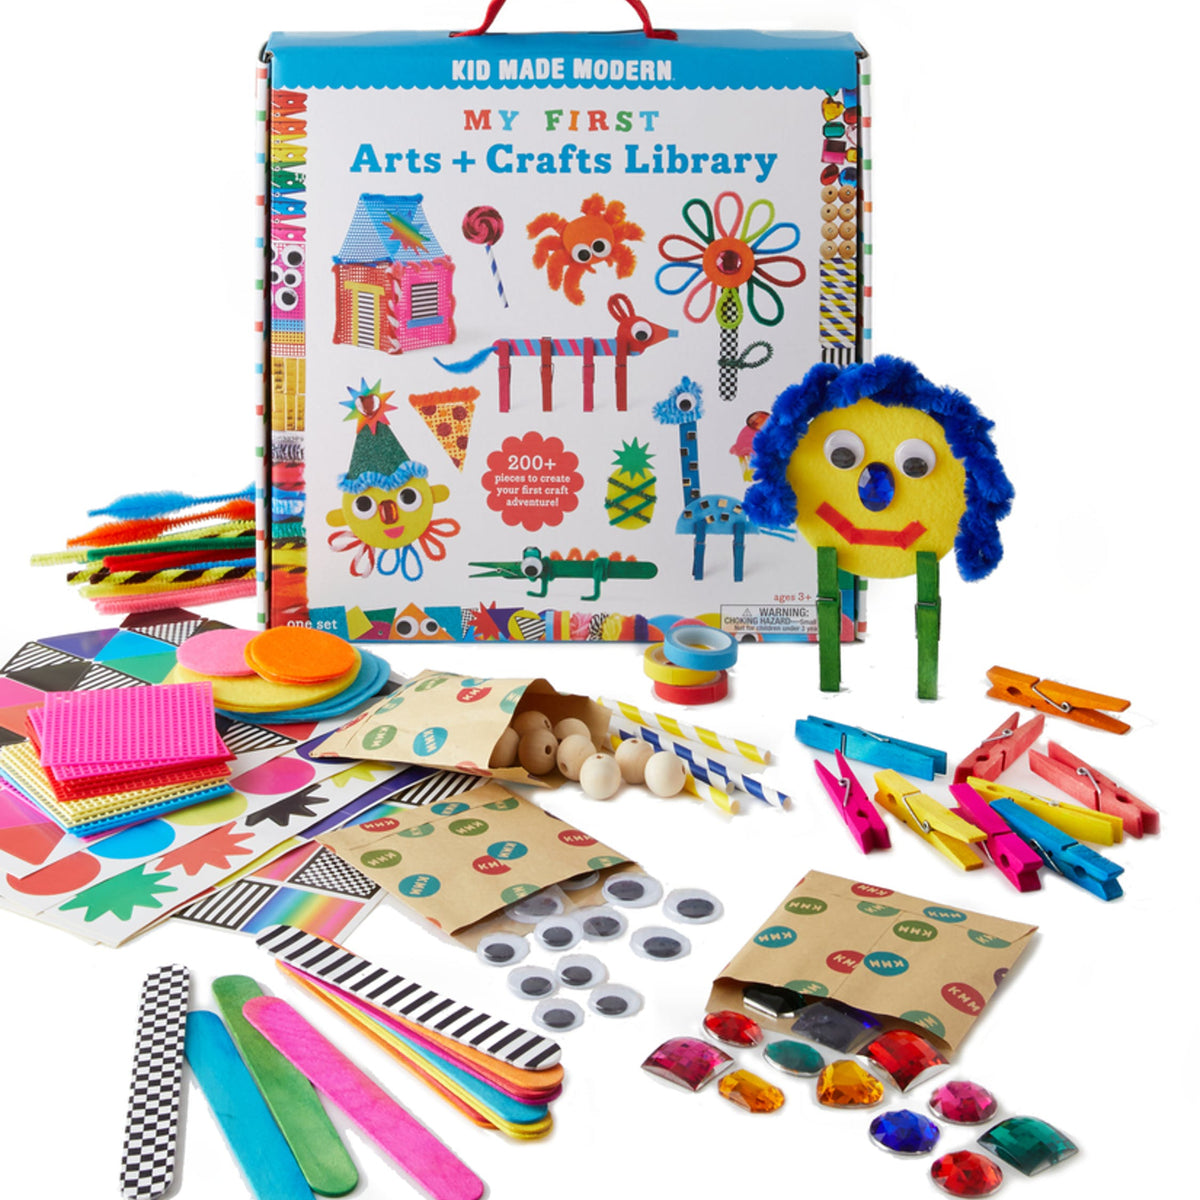 Kids Craft Kits by Kid Made Modern (a guide and review)